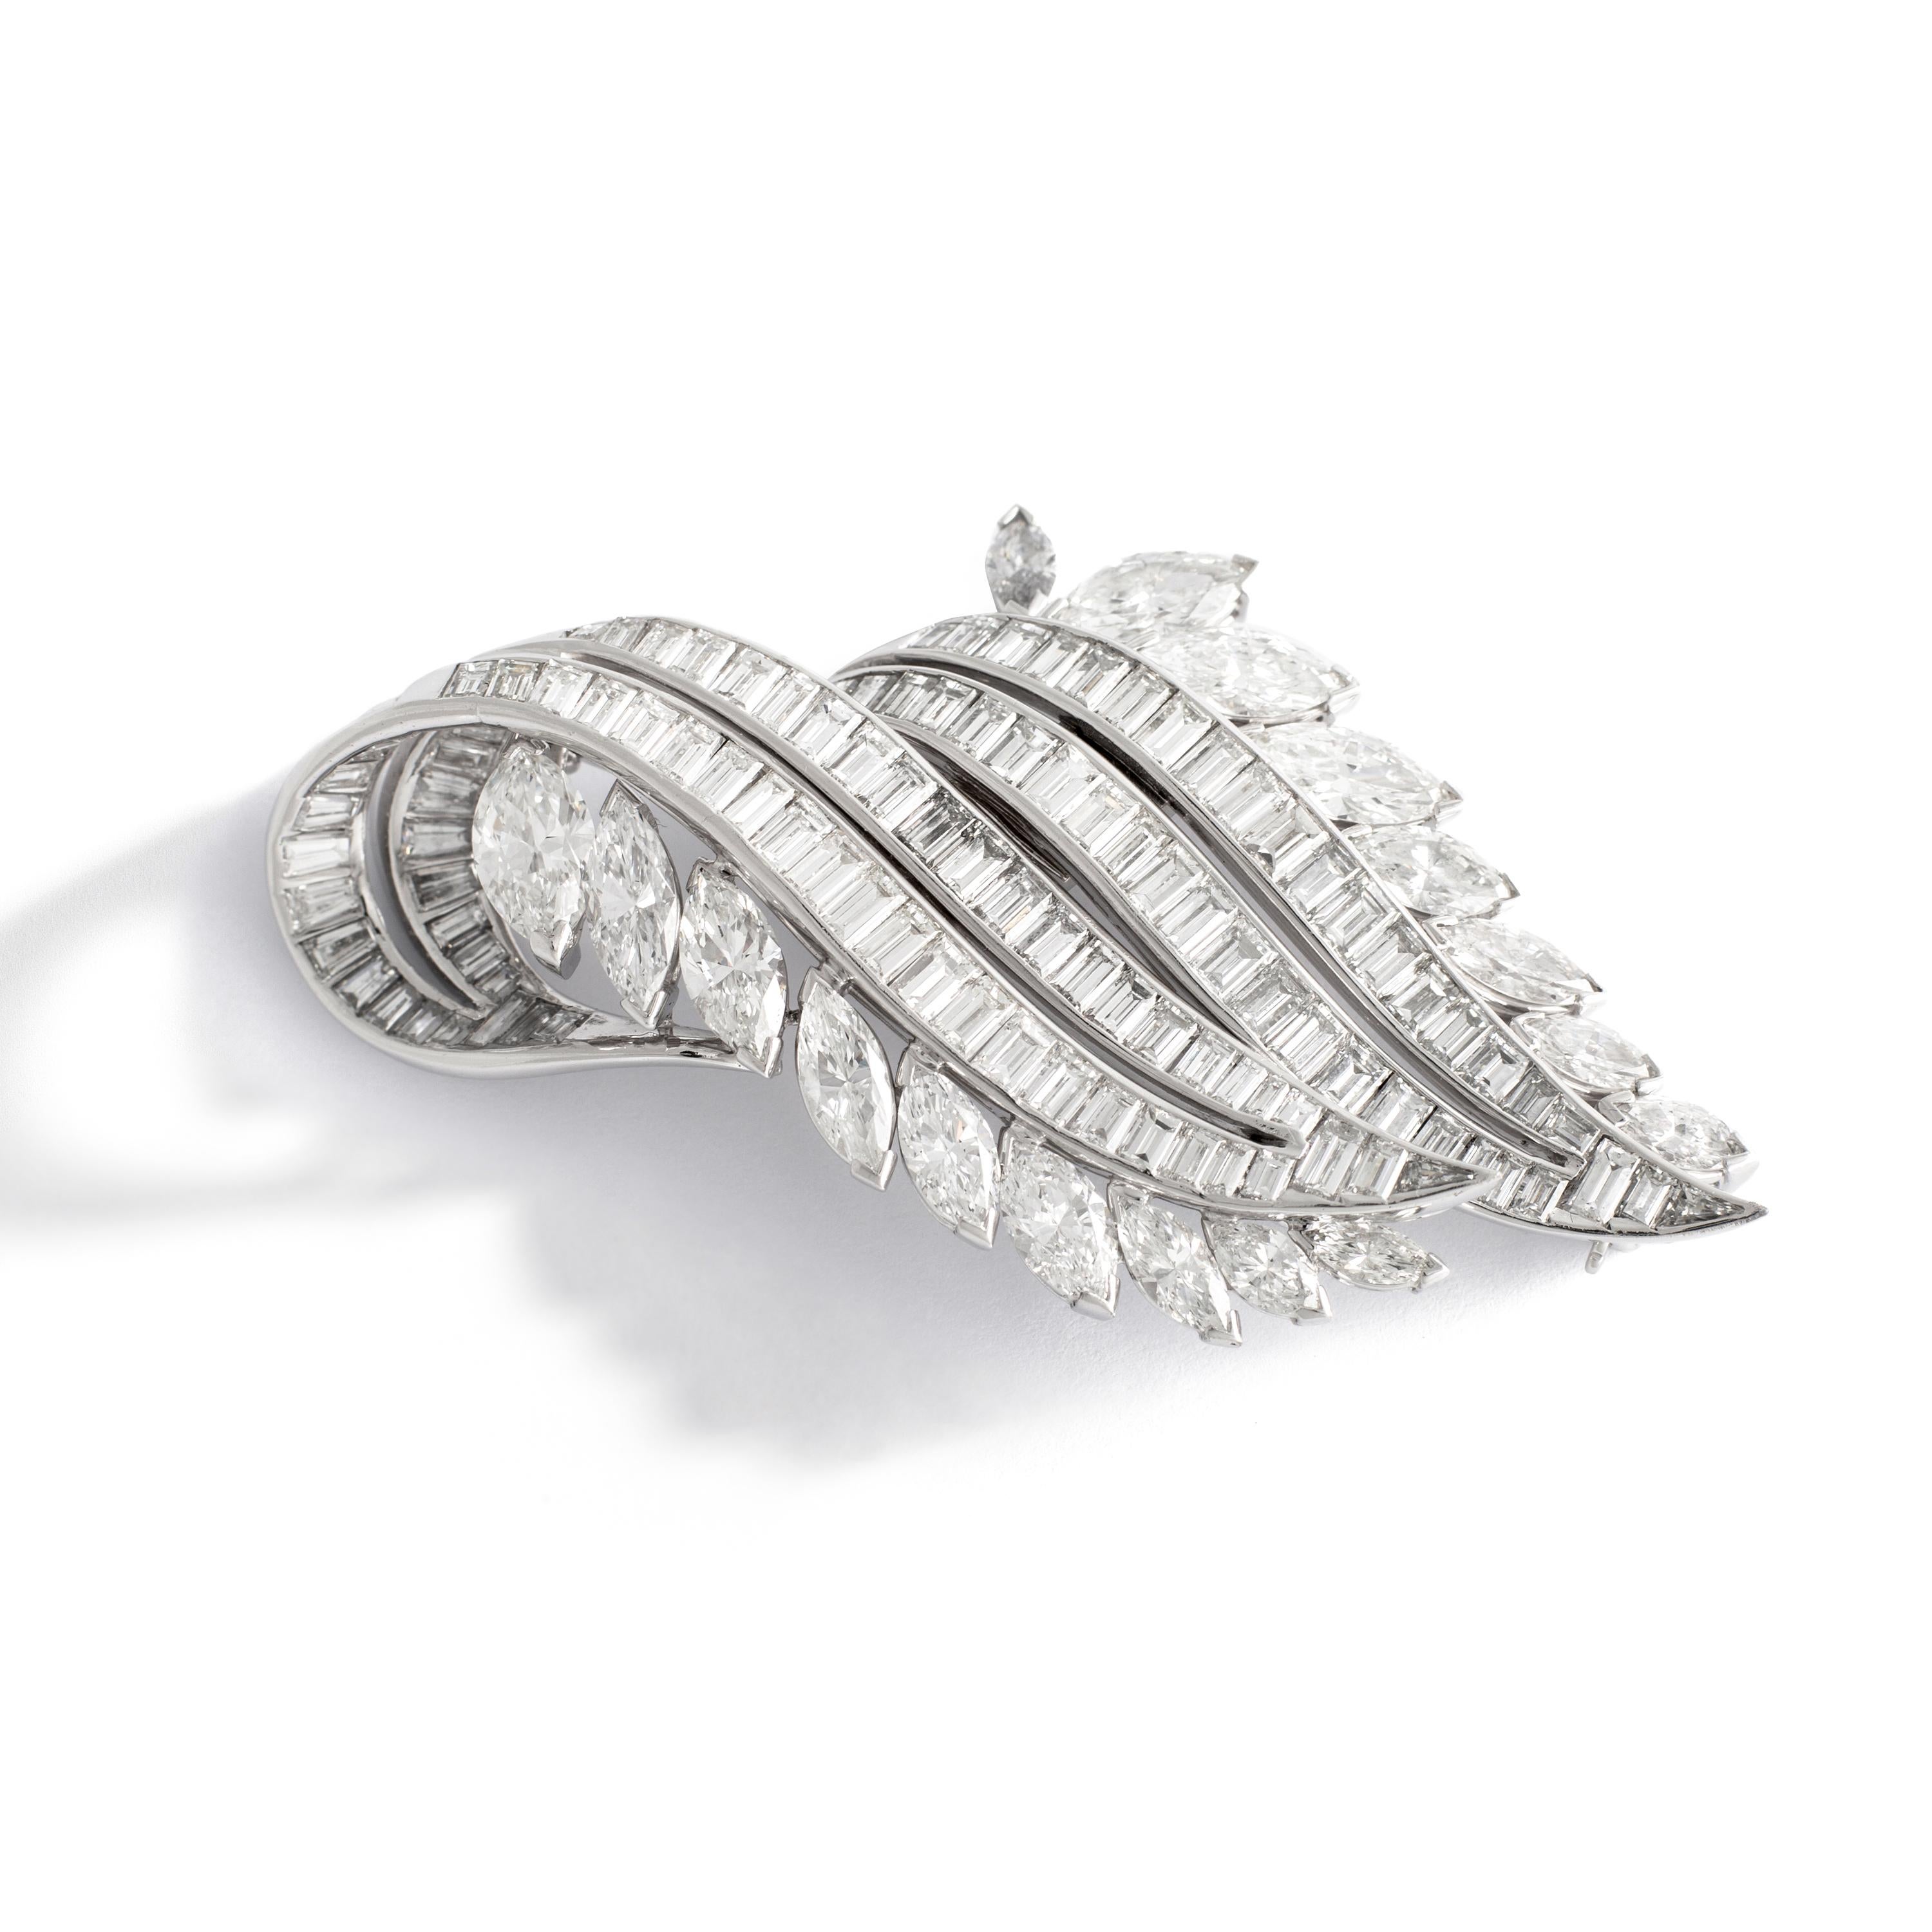 Double clip Brooch set by diamond baguette-cut and marquise-cut mounted on white gold 18K.
Circa 1970.